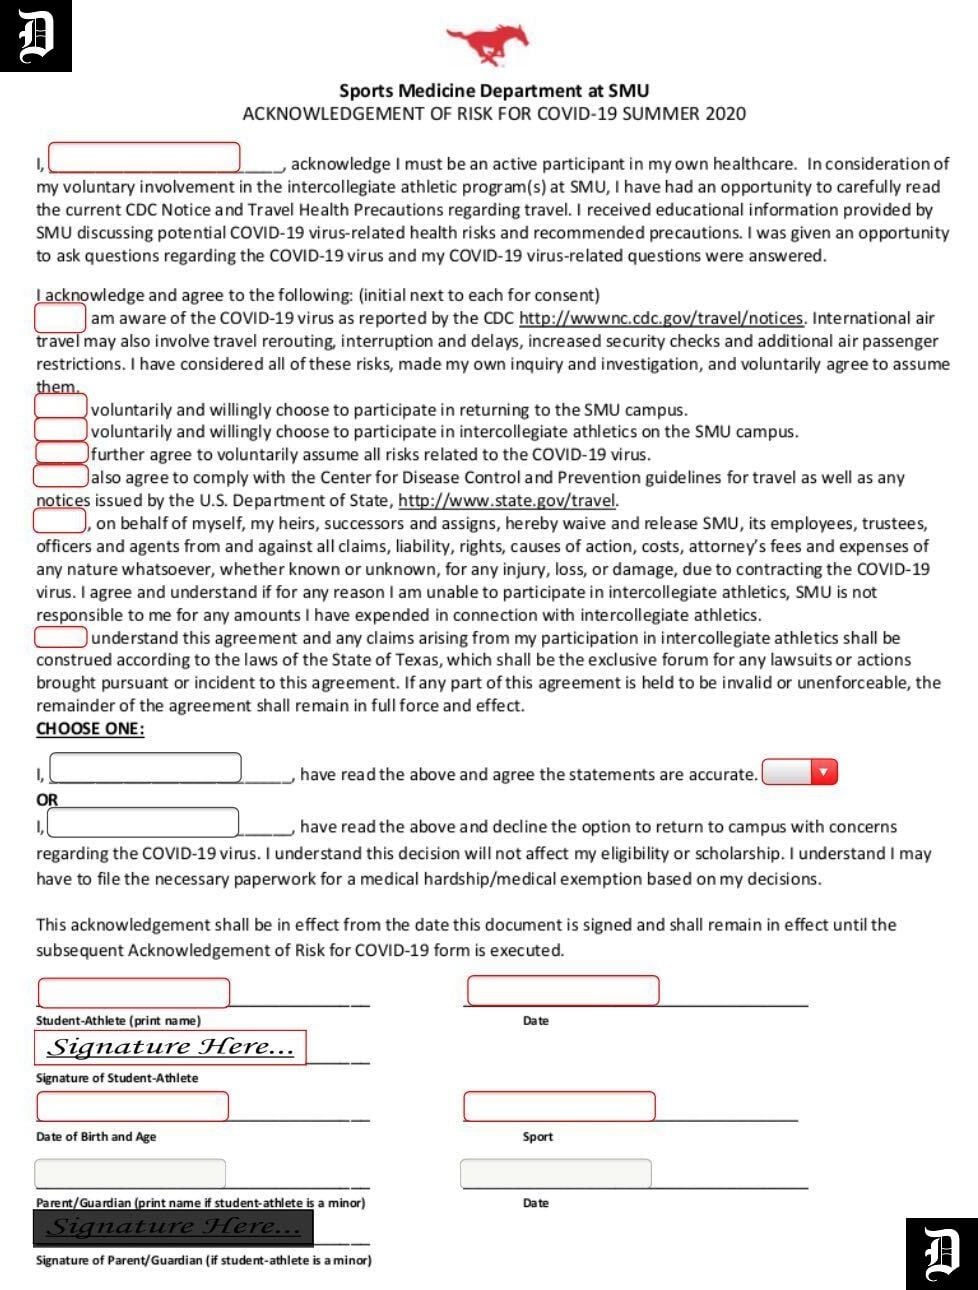 This is the document that SMU is requiring all student-athletes to sign in order to return...